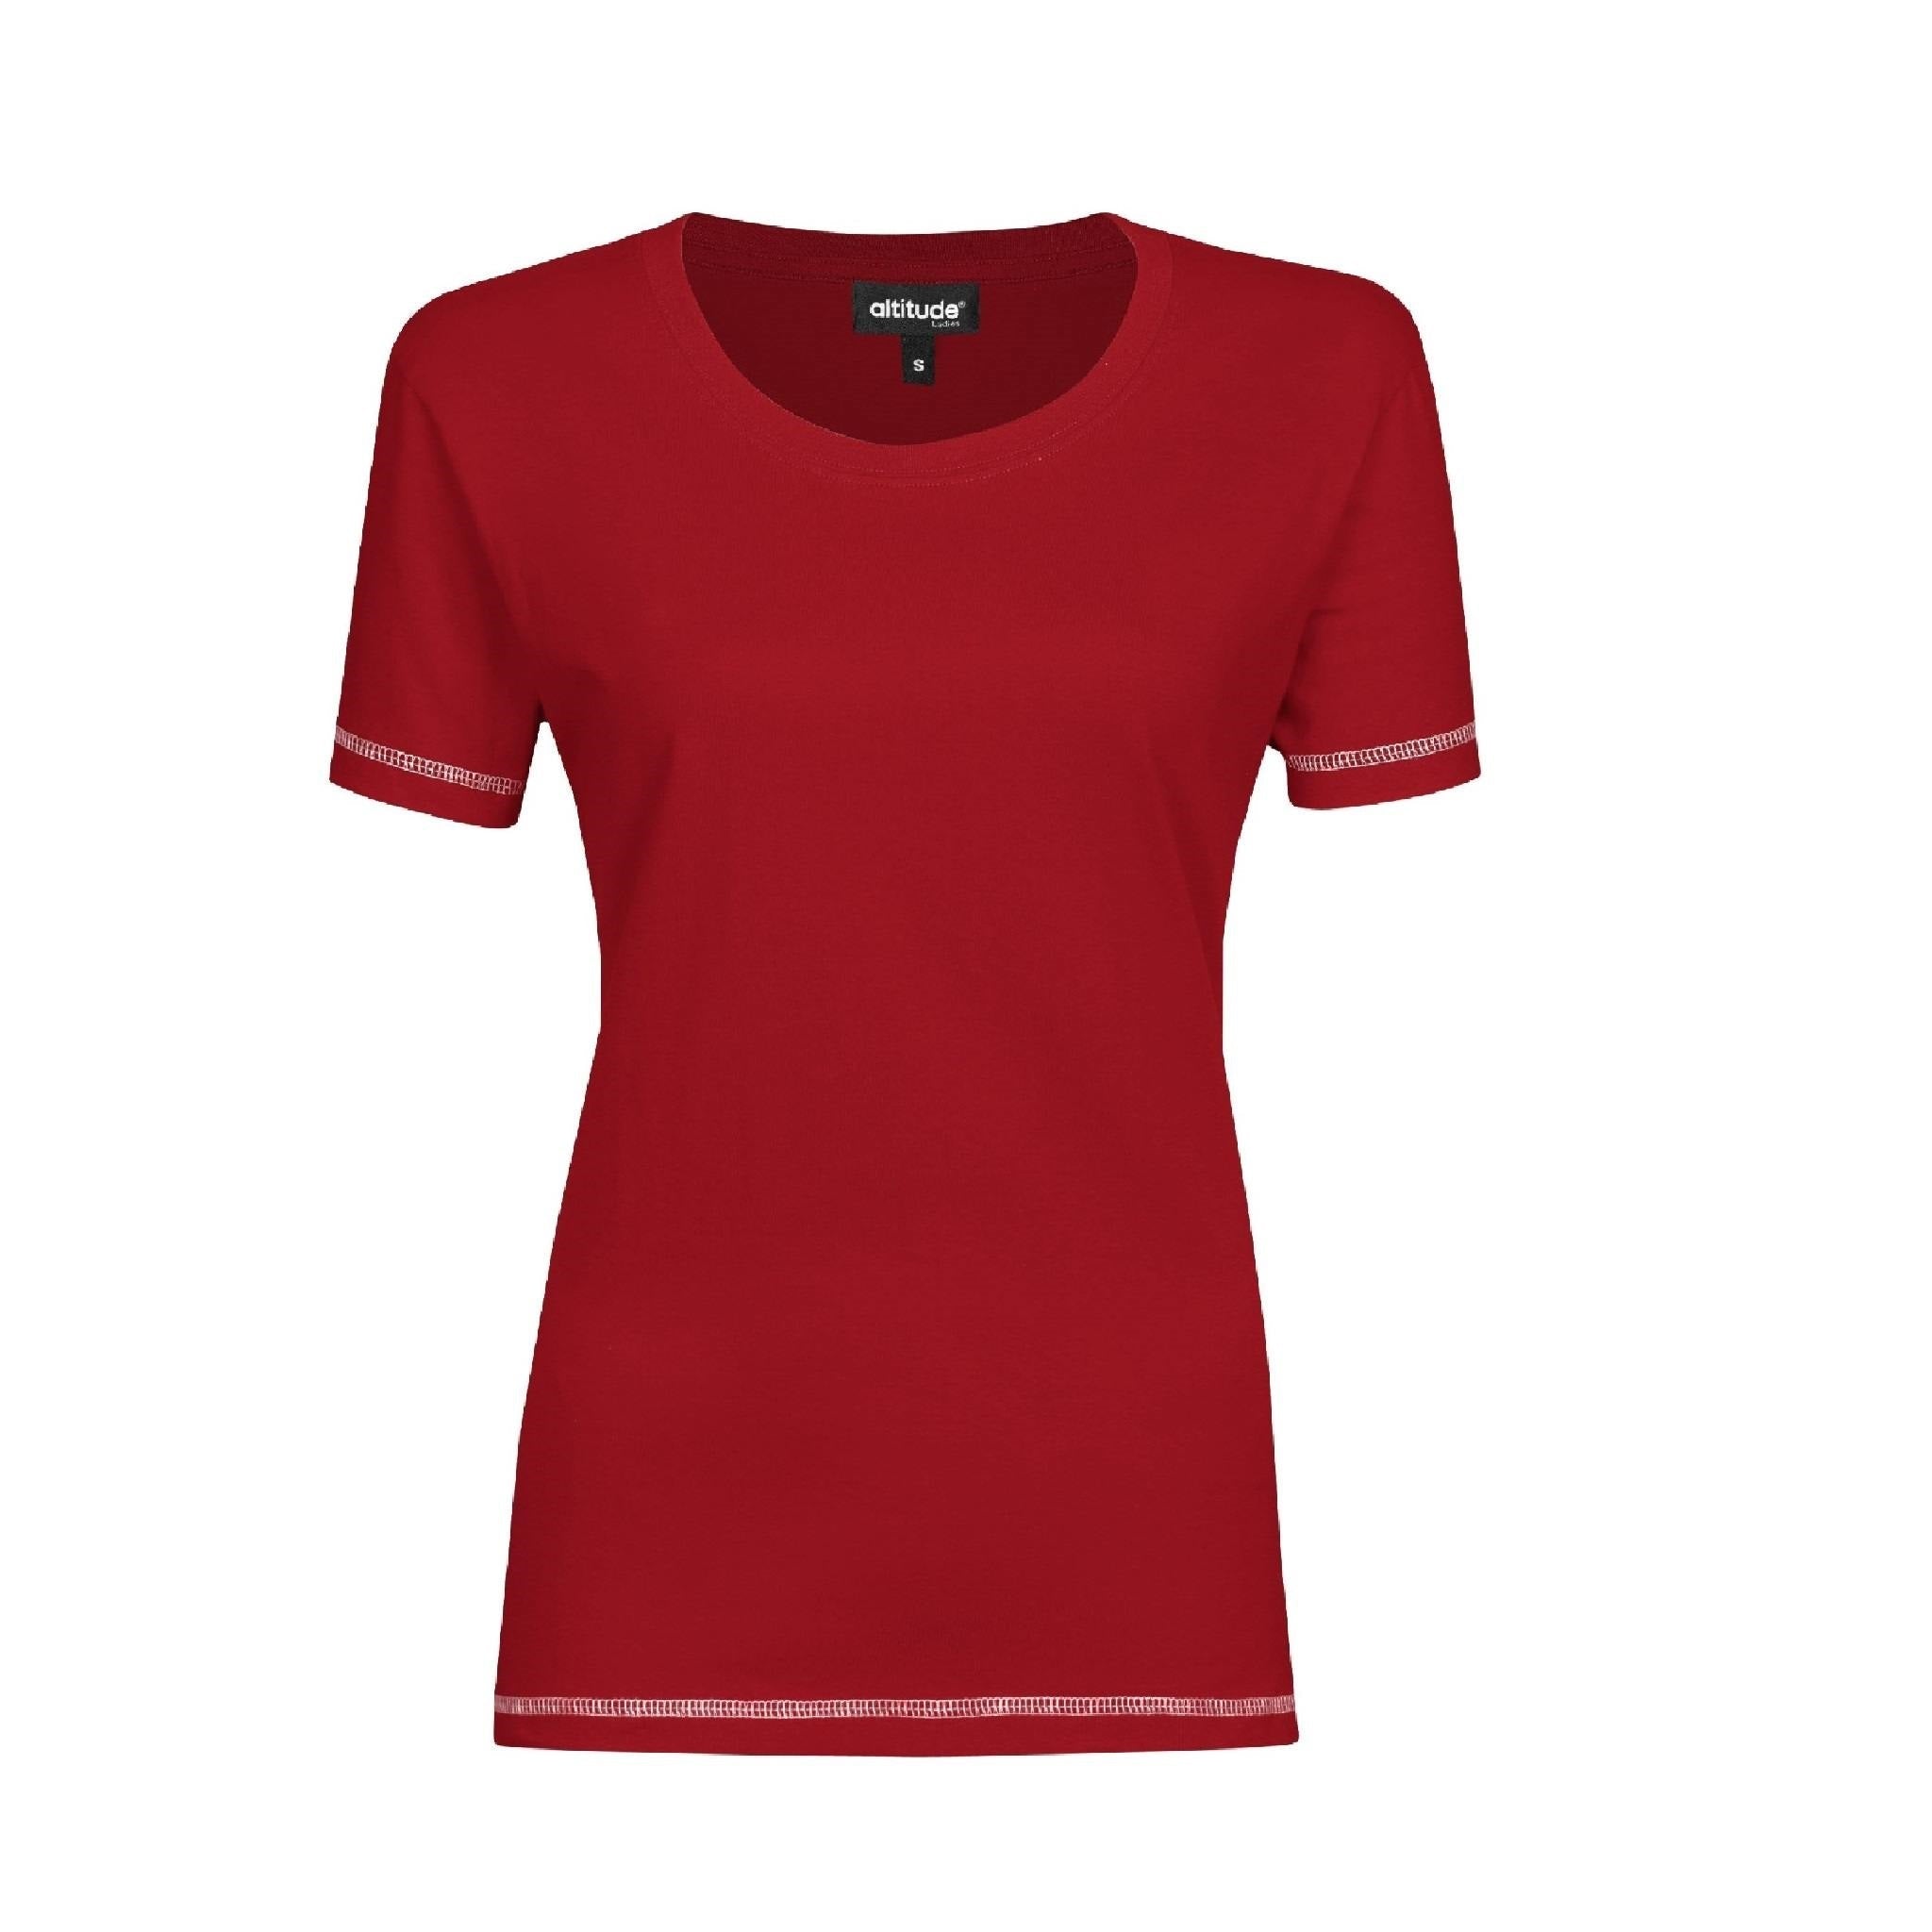 Ladies T Shirt red on a white background